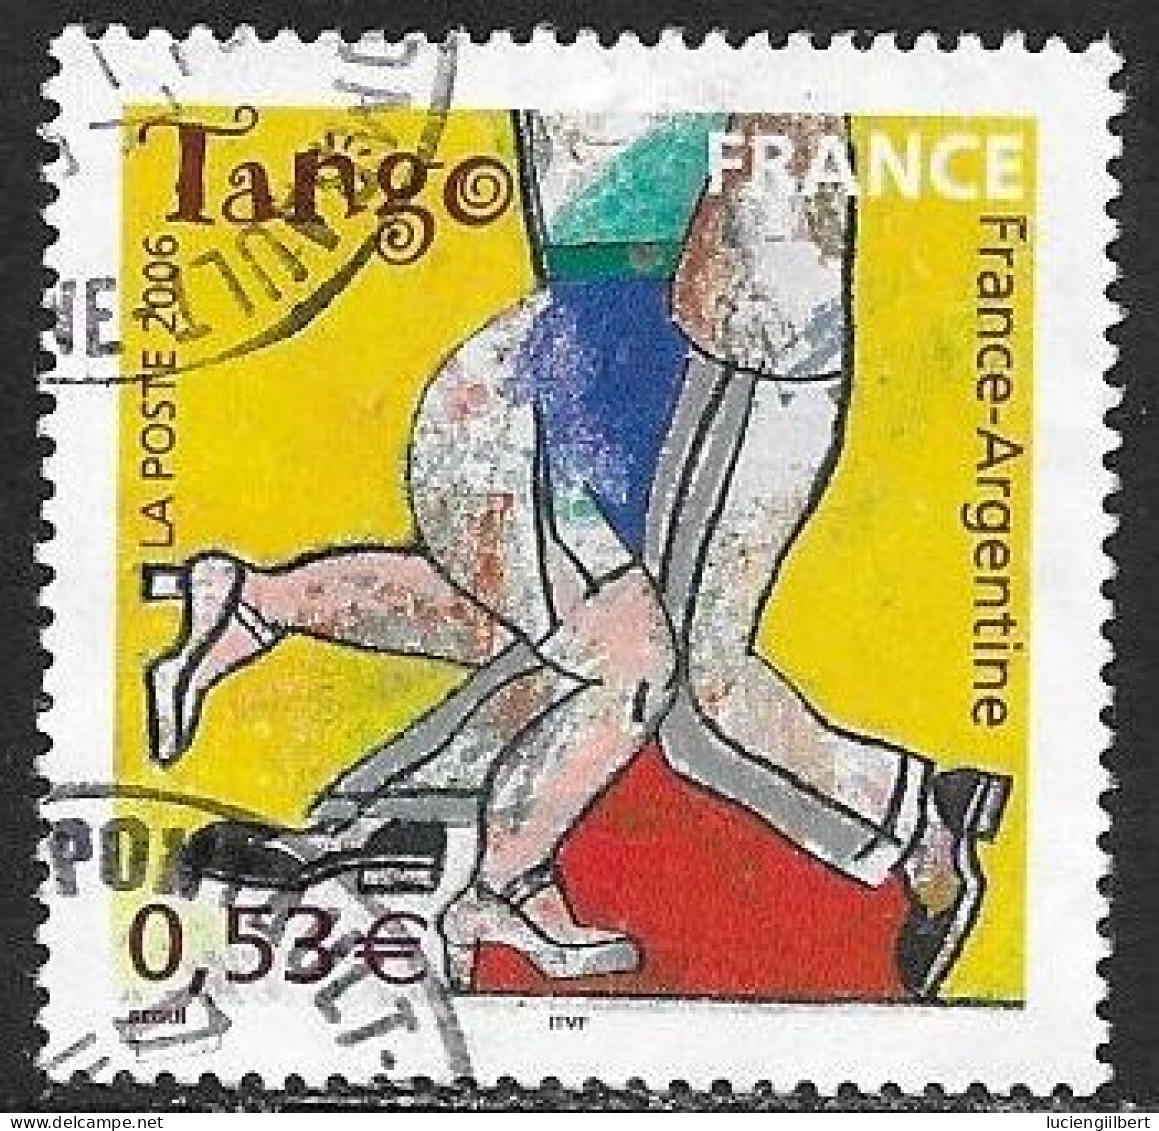 TIMBRE N° 3932 -   FRANCE ARGENTINE LE TANGO       - OBLITERE  -   2006 - Usados